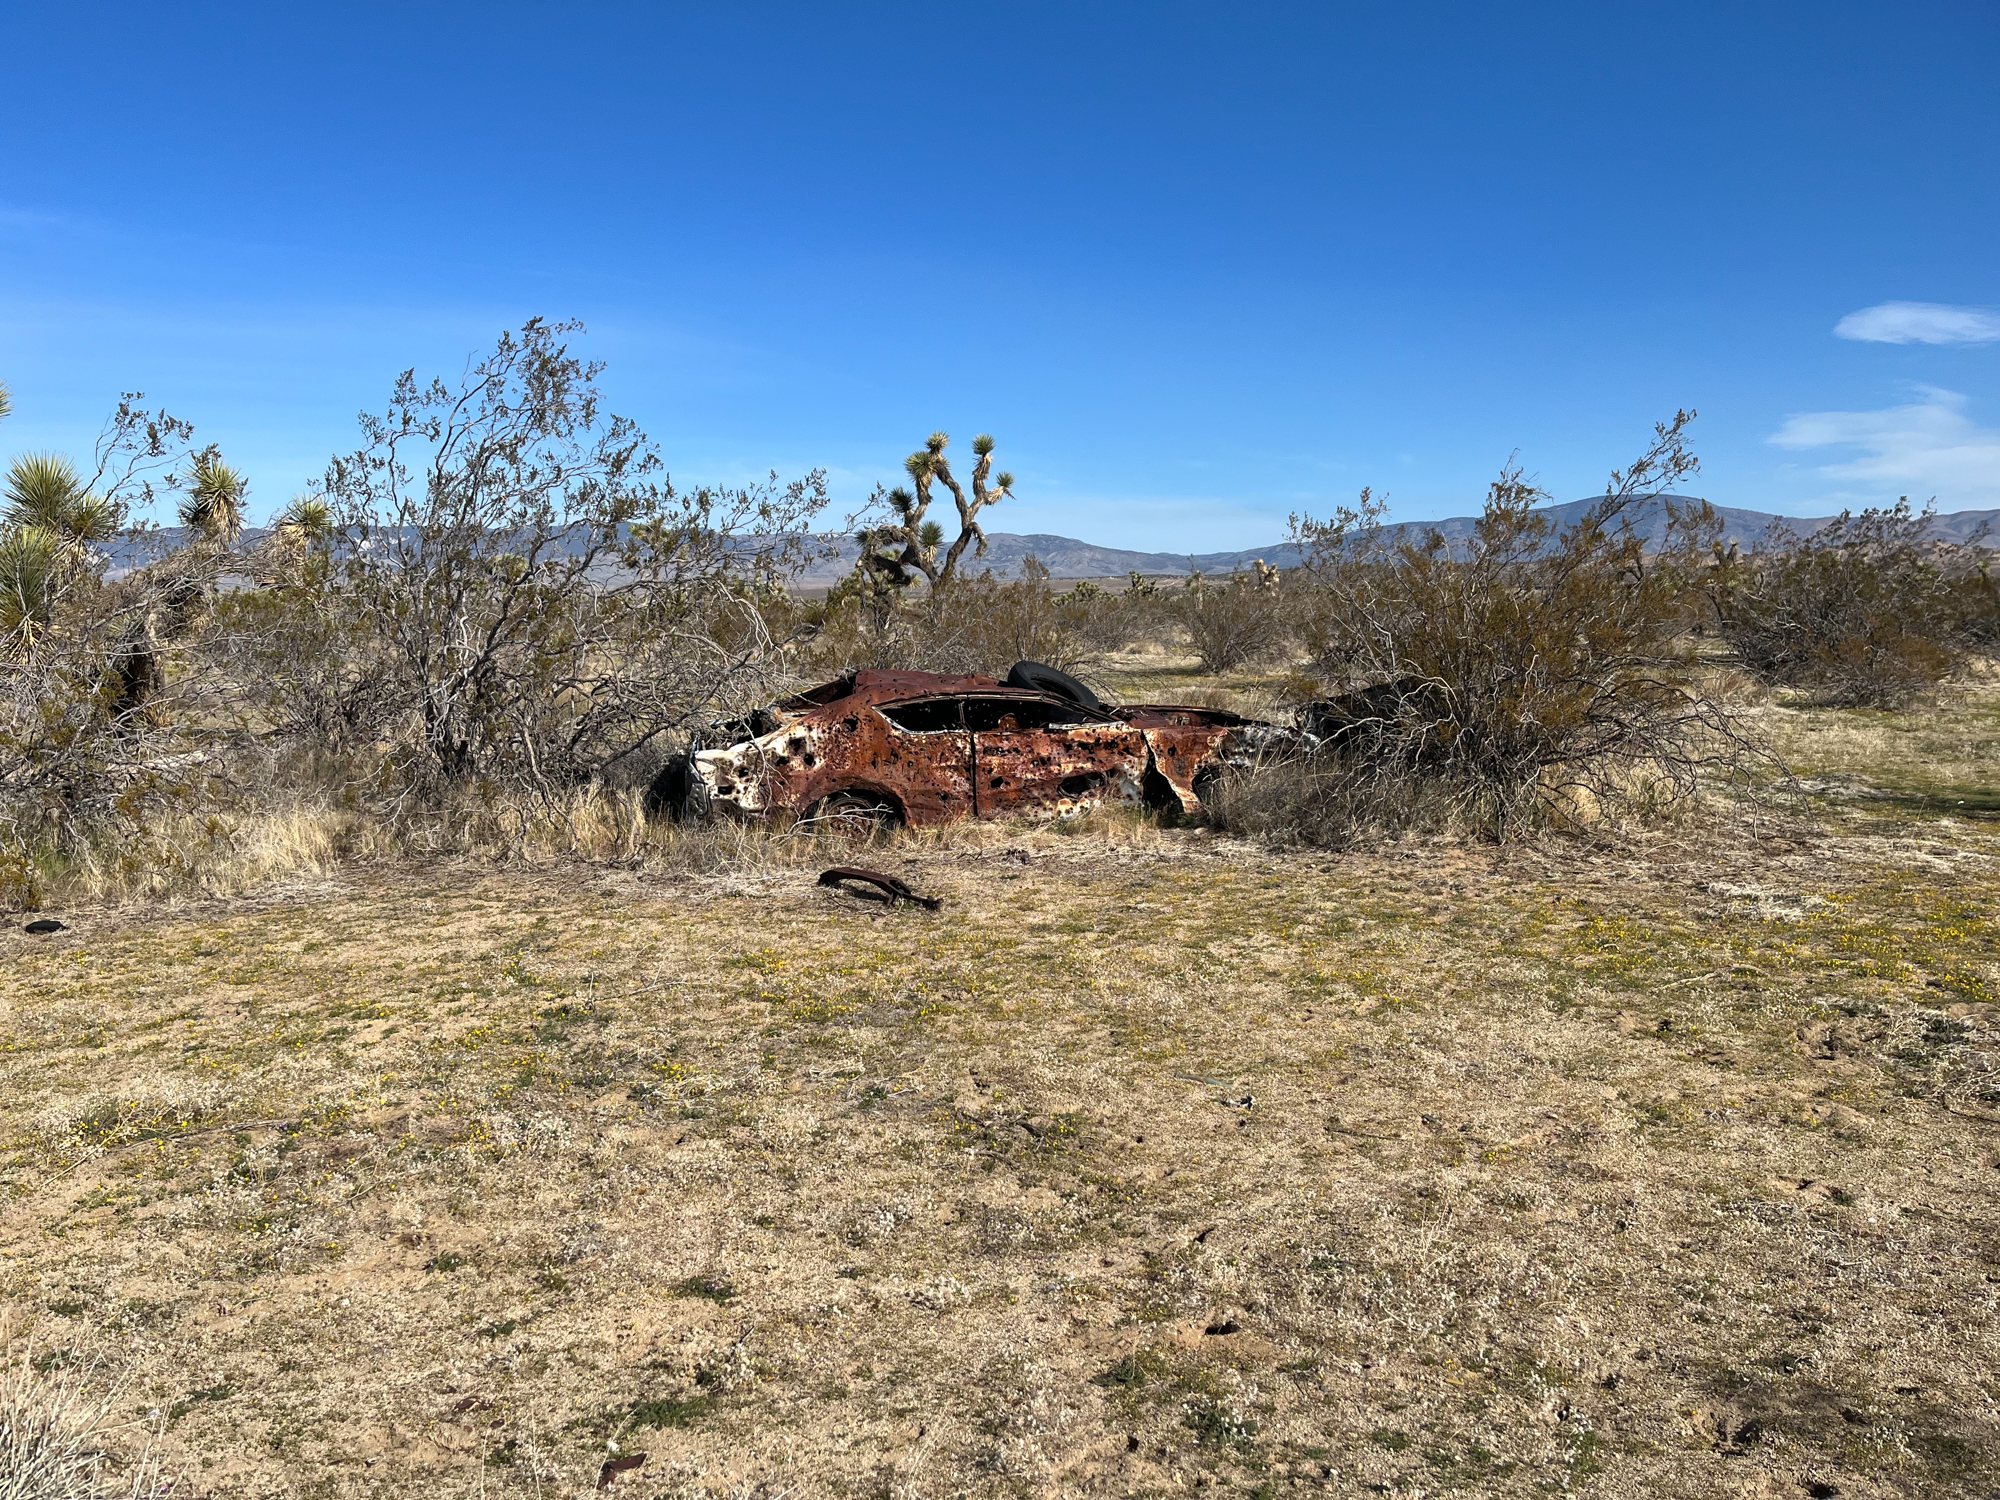 A rusted old car body in the brush of Antelope Valley.